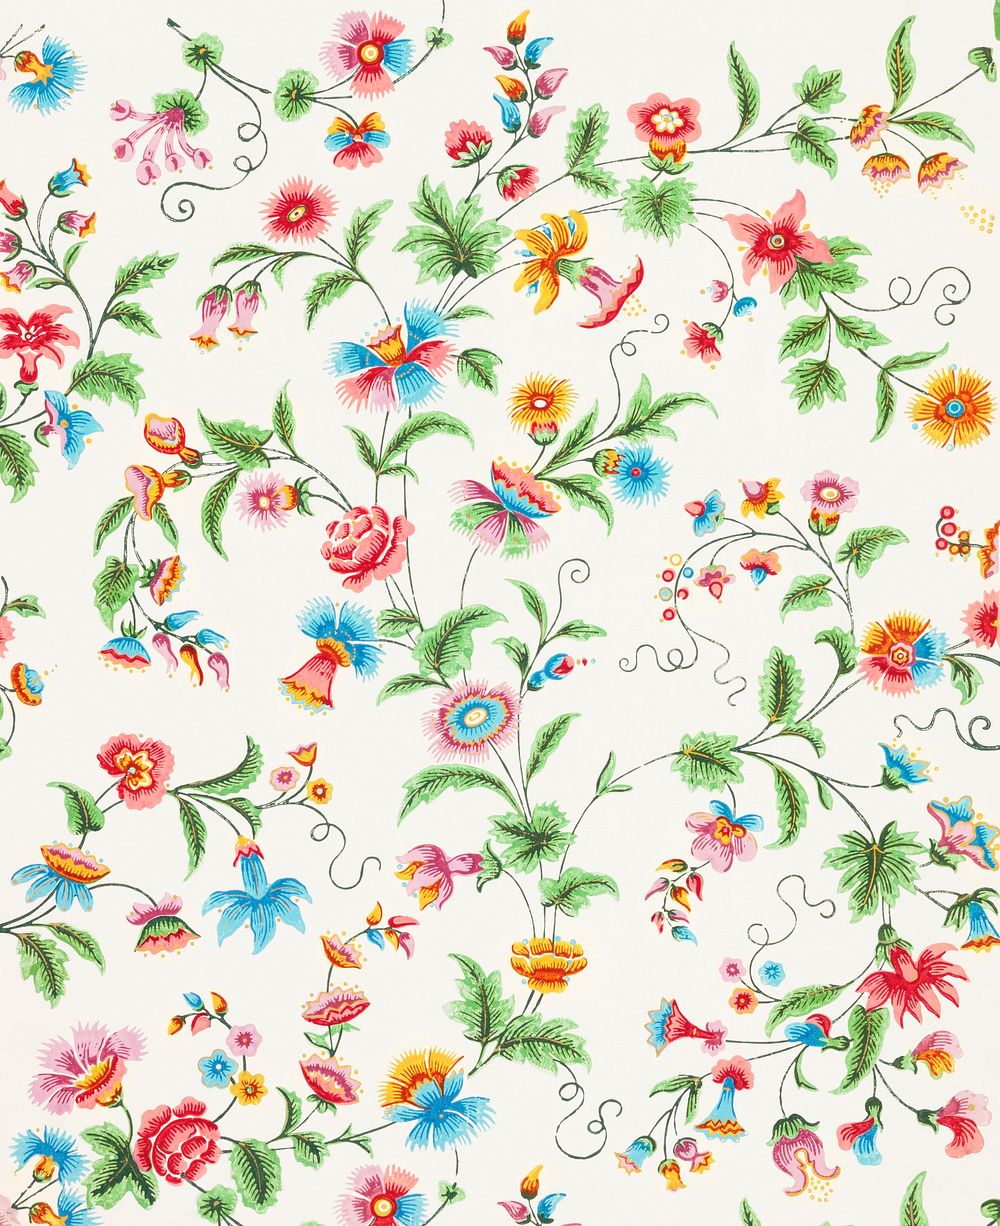 Vintage flower wallpaper (ca. 1800) in high resolution. Original from The Smithsonian. Digitally enhanced by rawpixel.